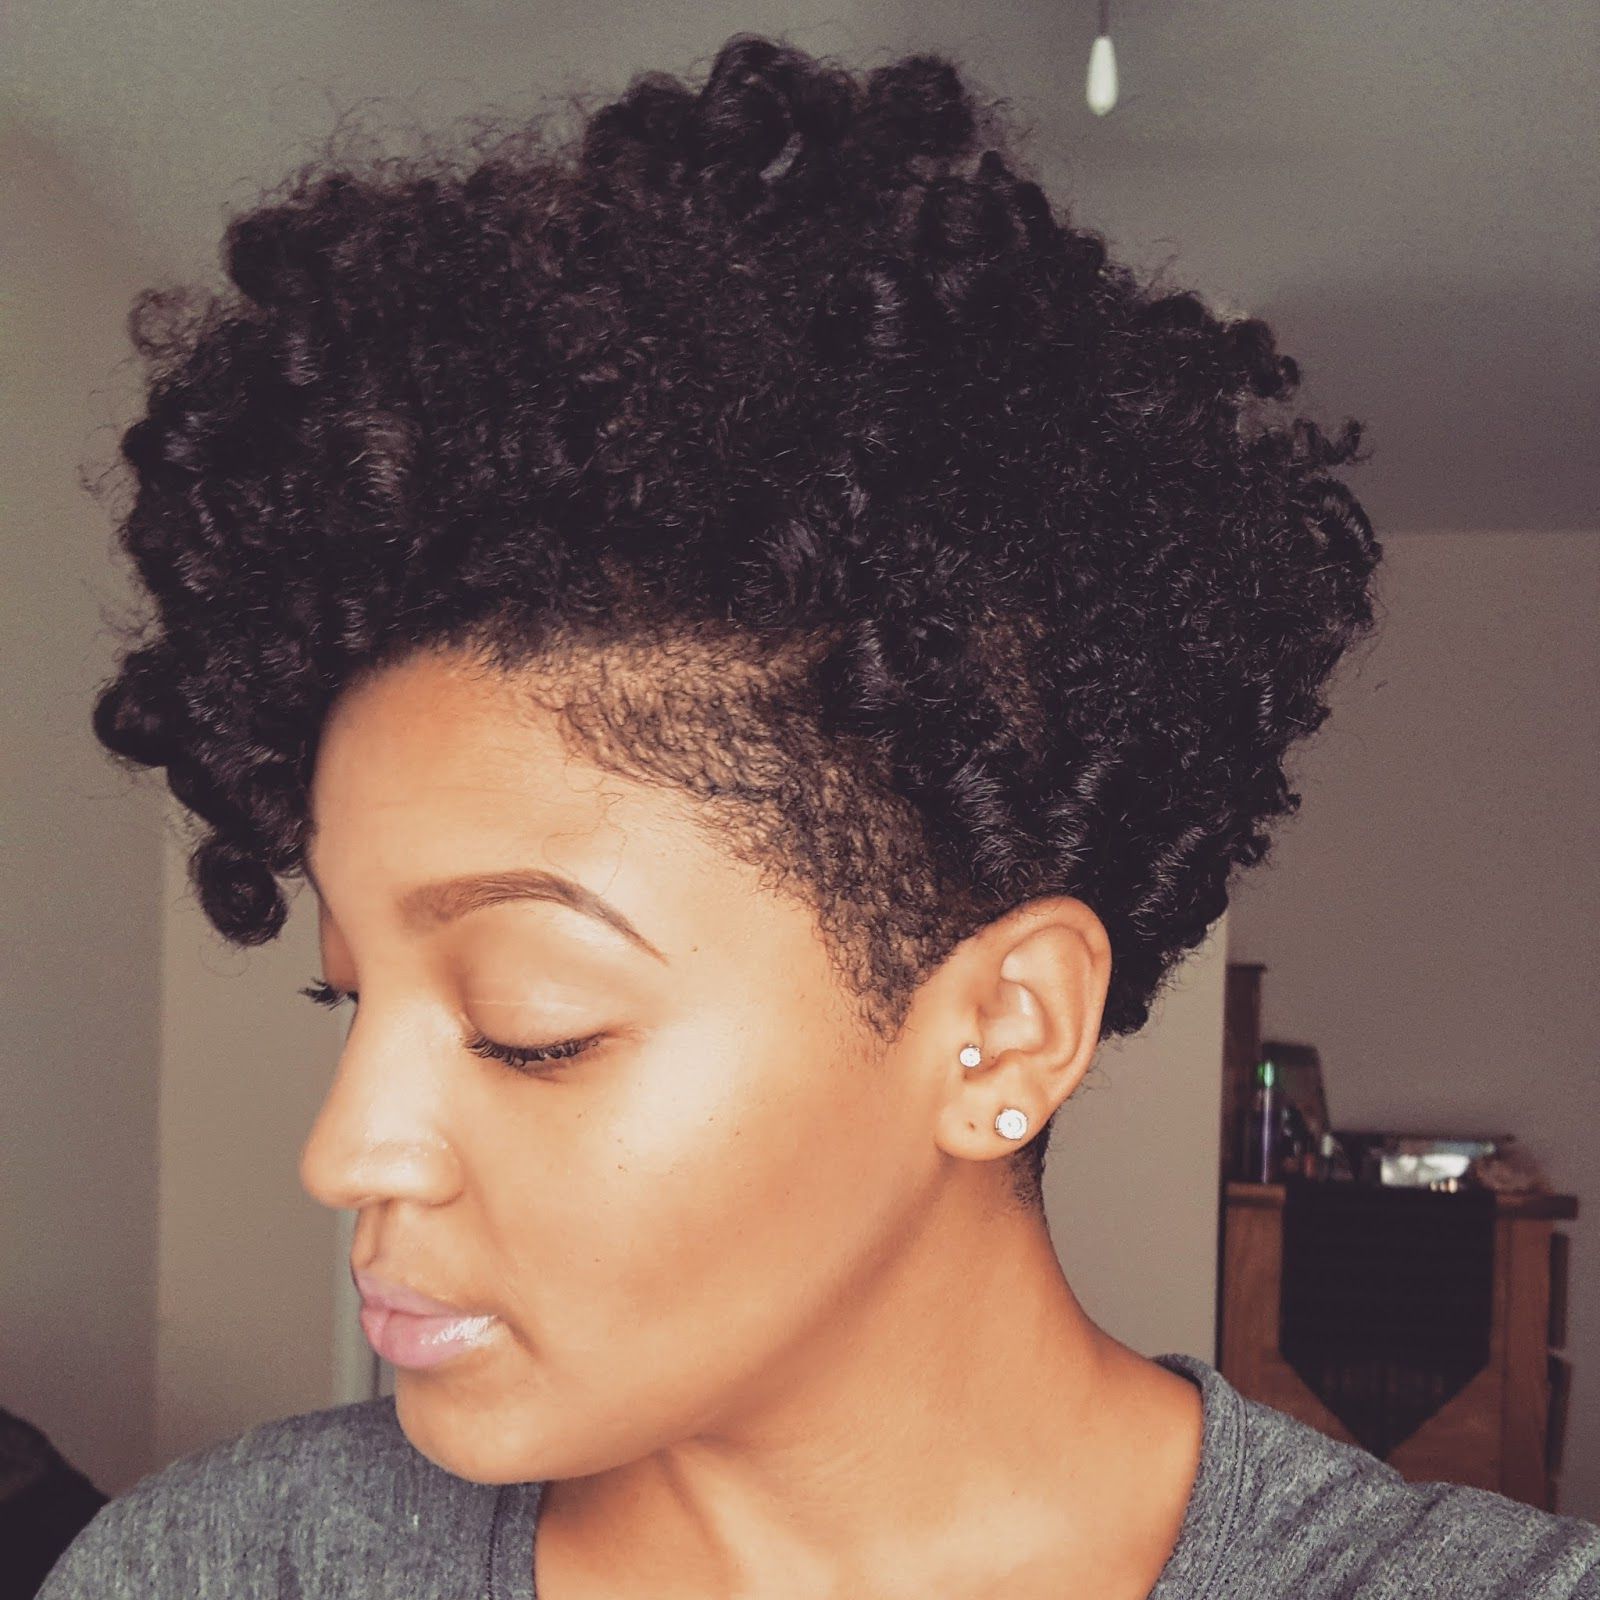 Tapered Cuts Are All The Rave In The Natural Hair Community (View 2 of 20)